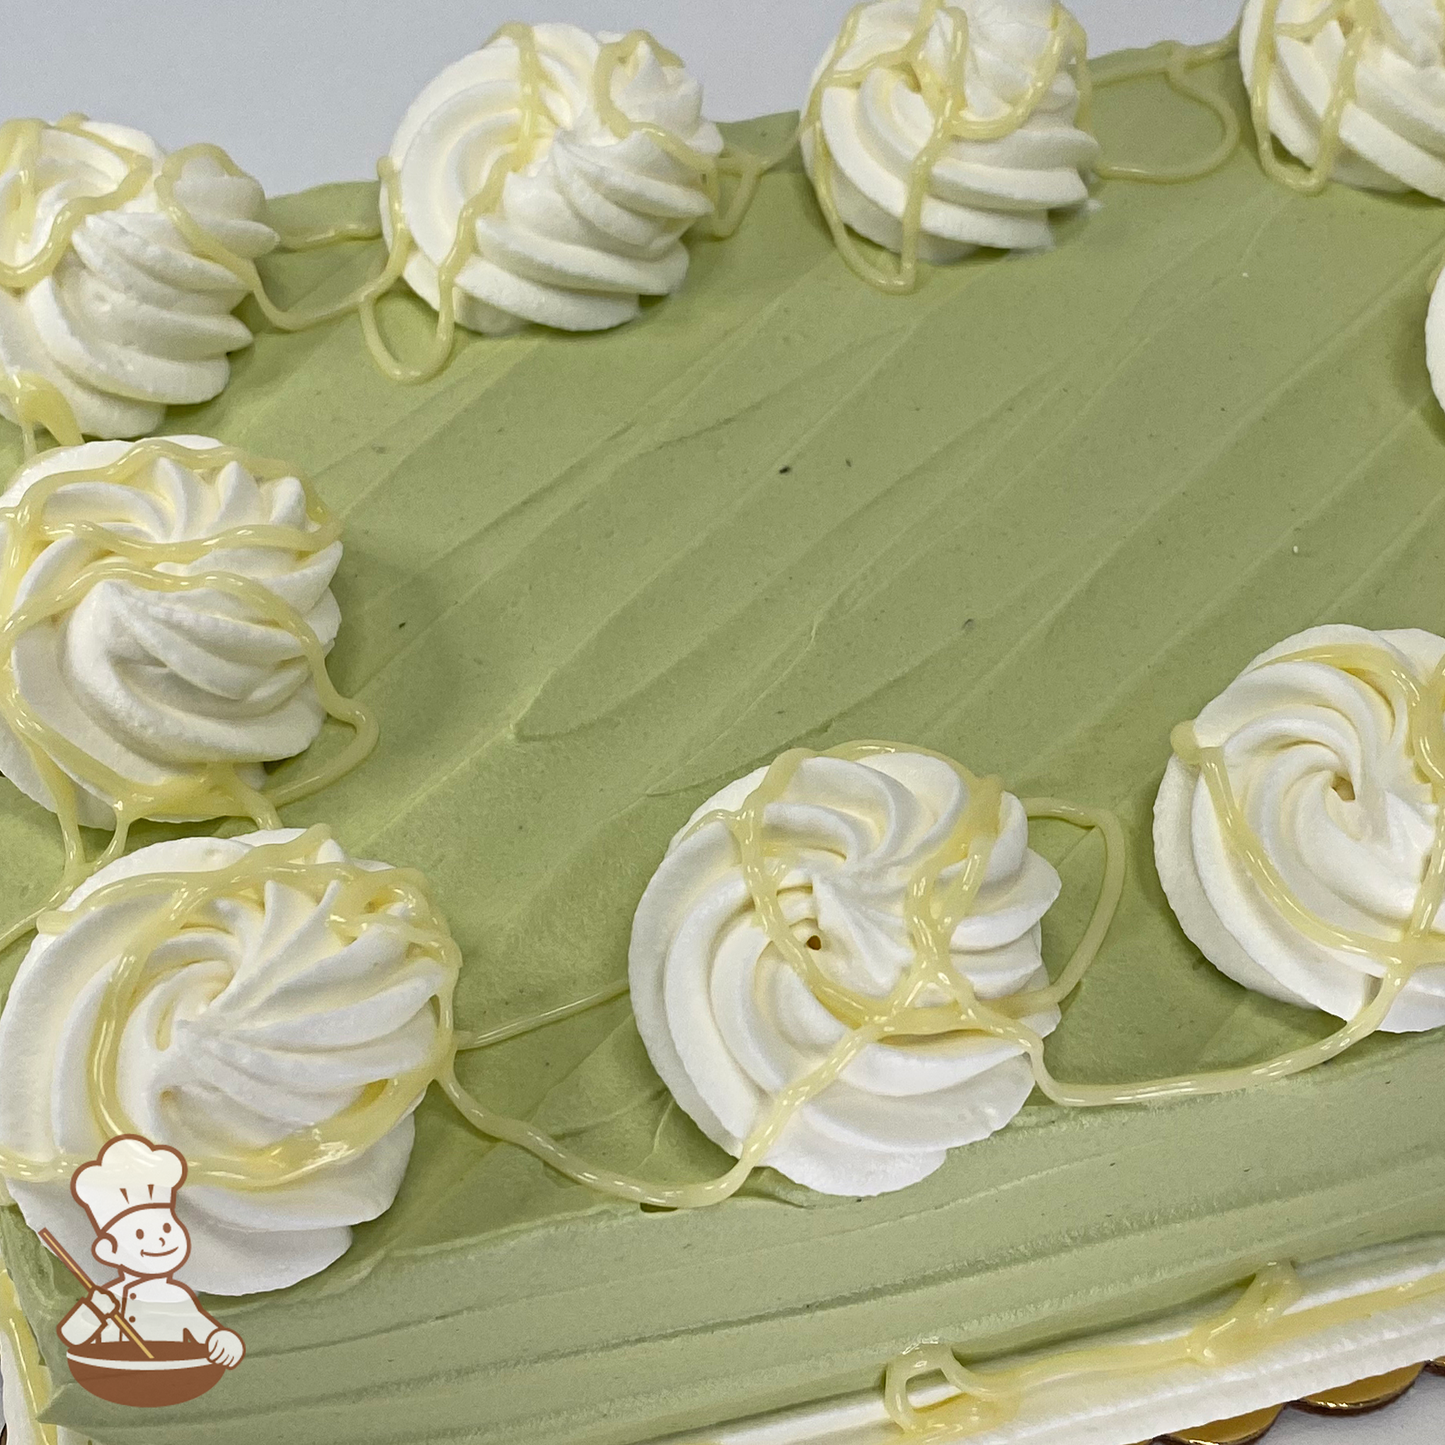 Sheet cake with match cream icing and white chocolate drizzle.